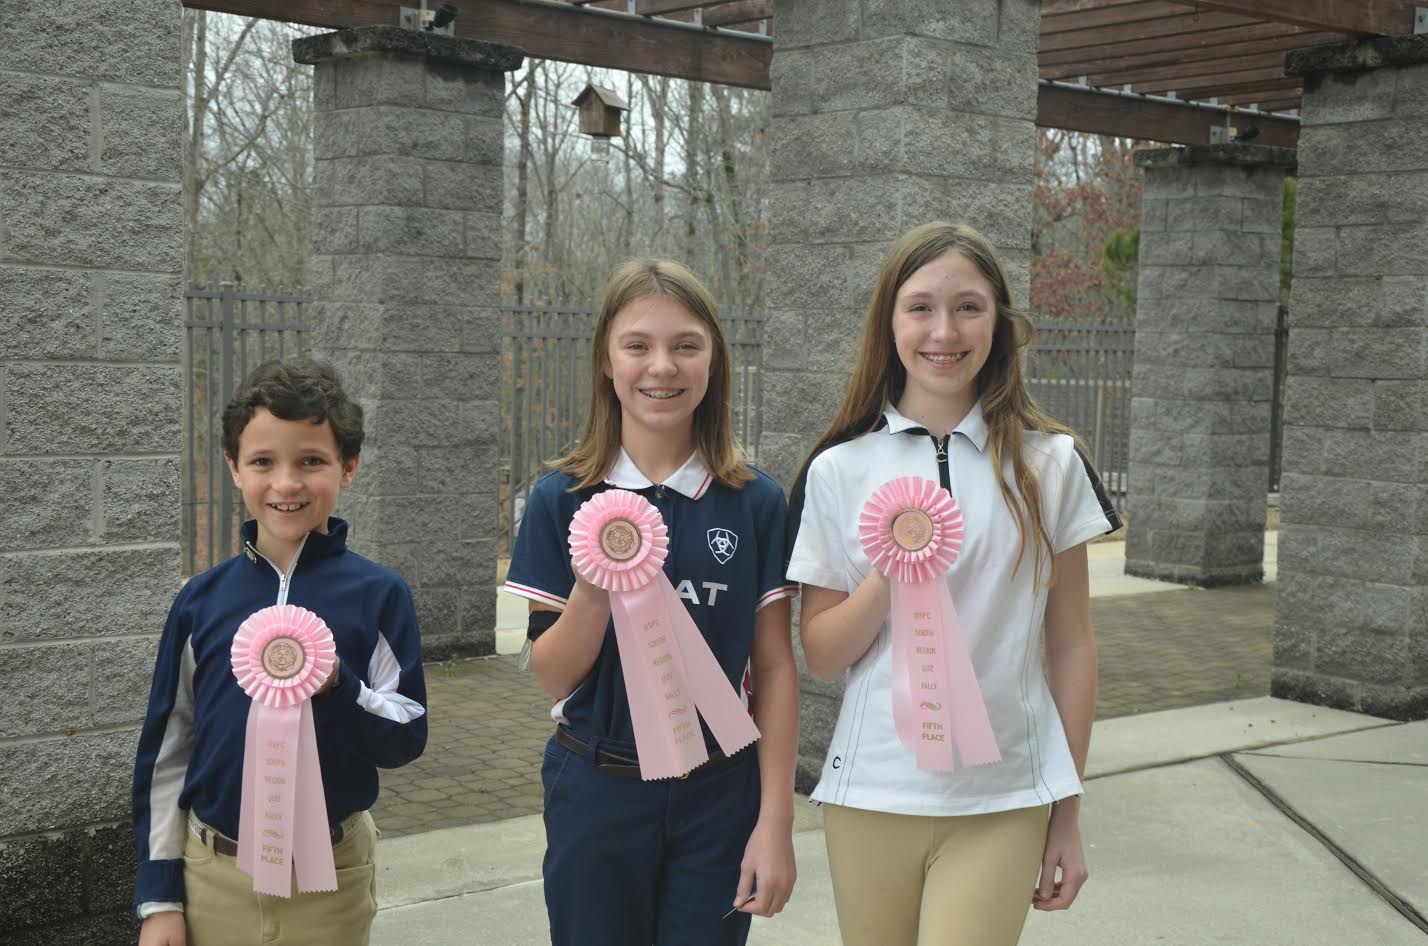 Trussville 10-year-old’s Pony Club wins quiz competition in Georgia